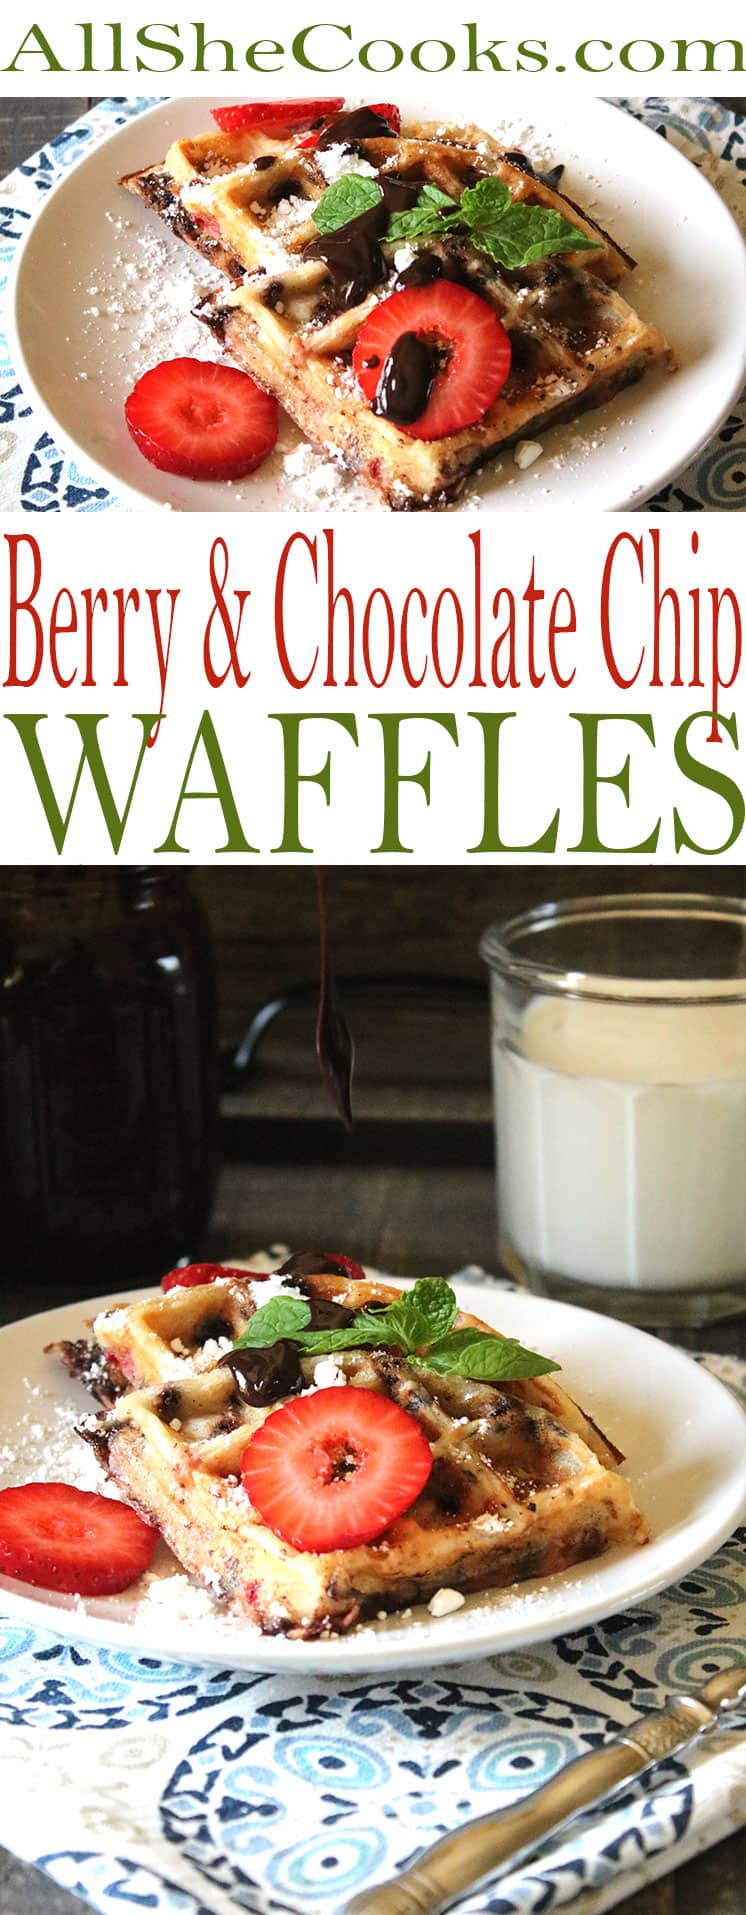 This Strawberry and Chocolate Chip Waffle recipe is great for weekday mornings, lazy weekends and even for using as a dessert waffle recipe. Homemade waffles are always more delicious.